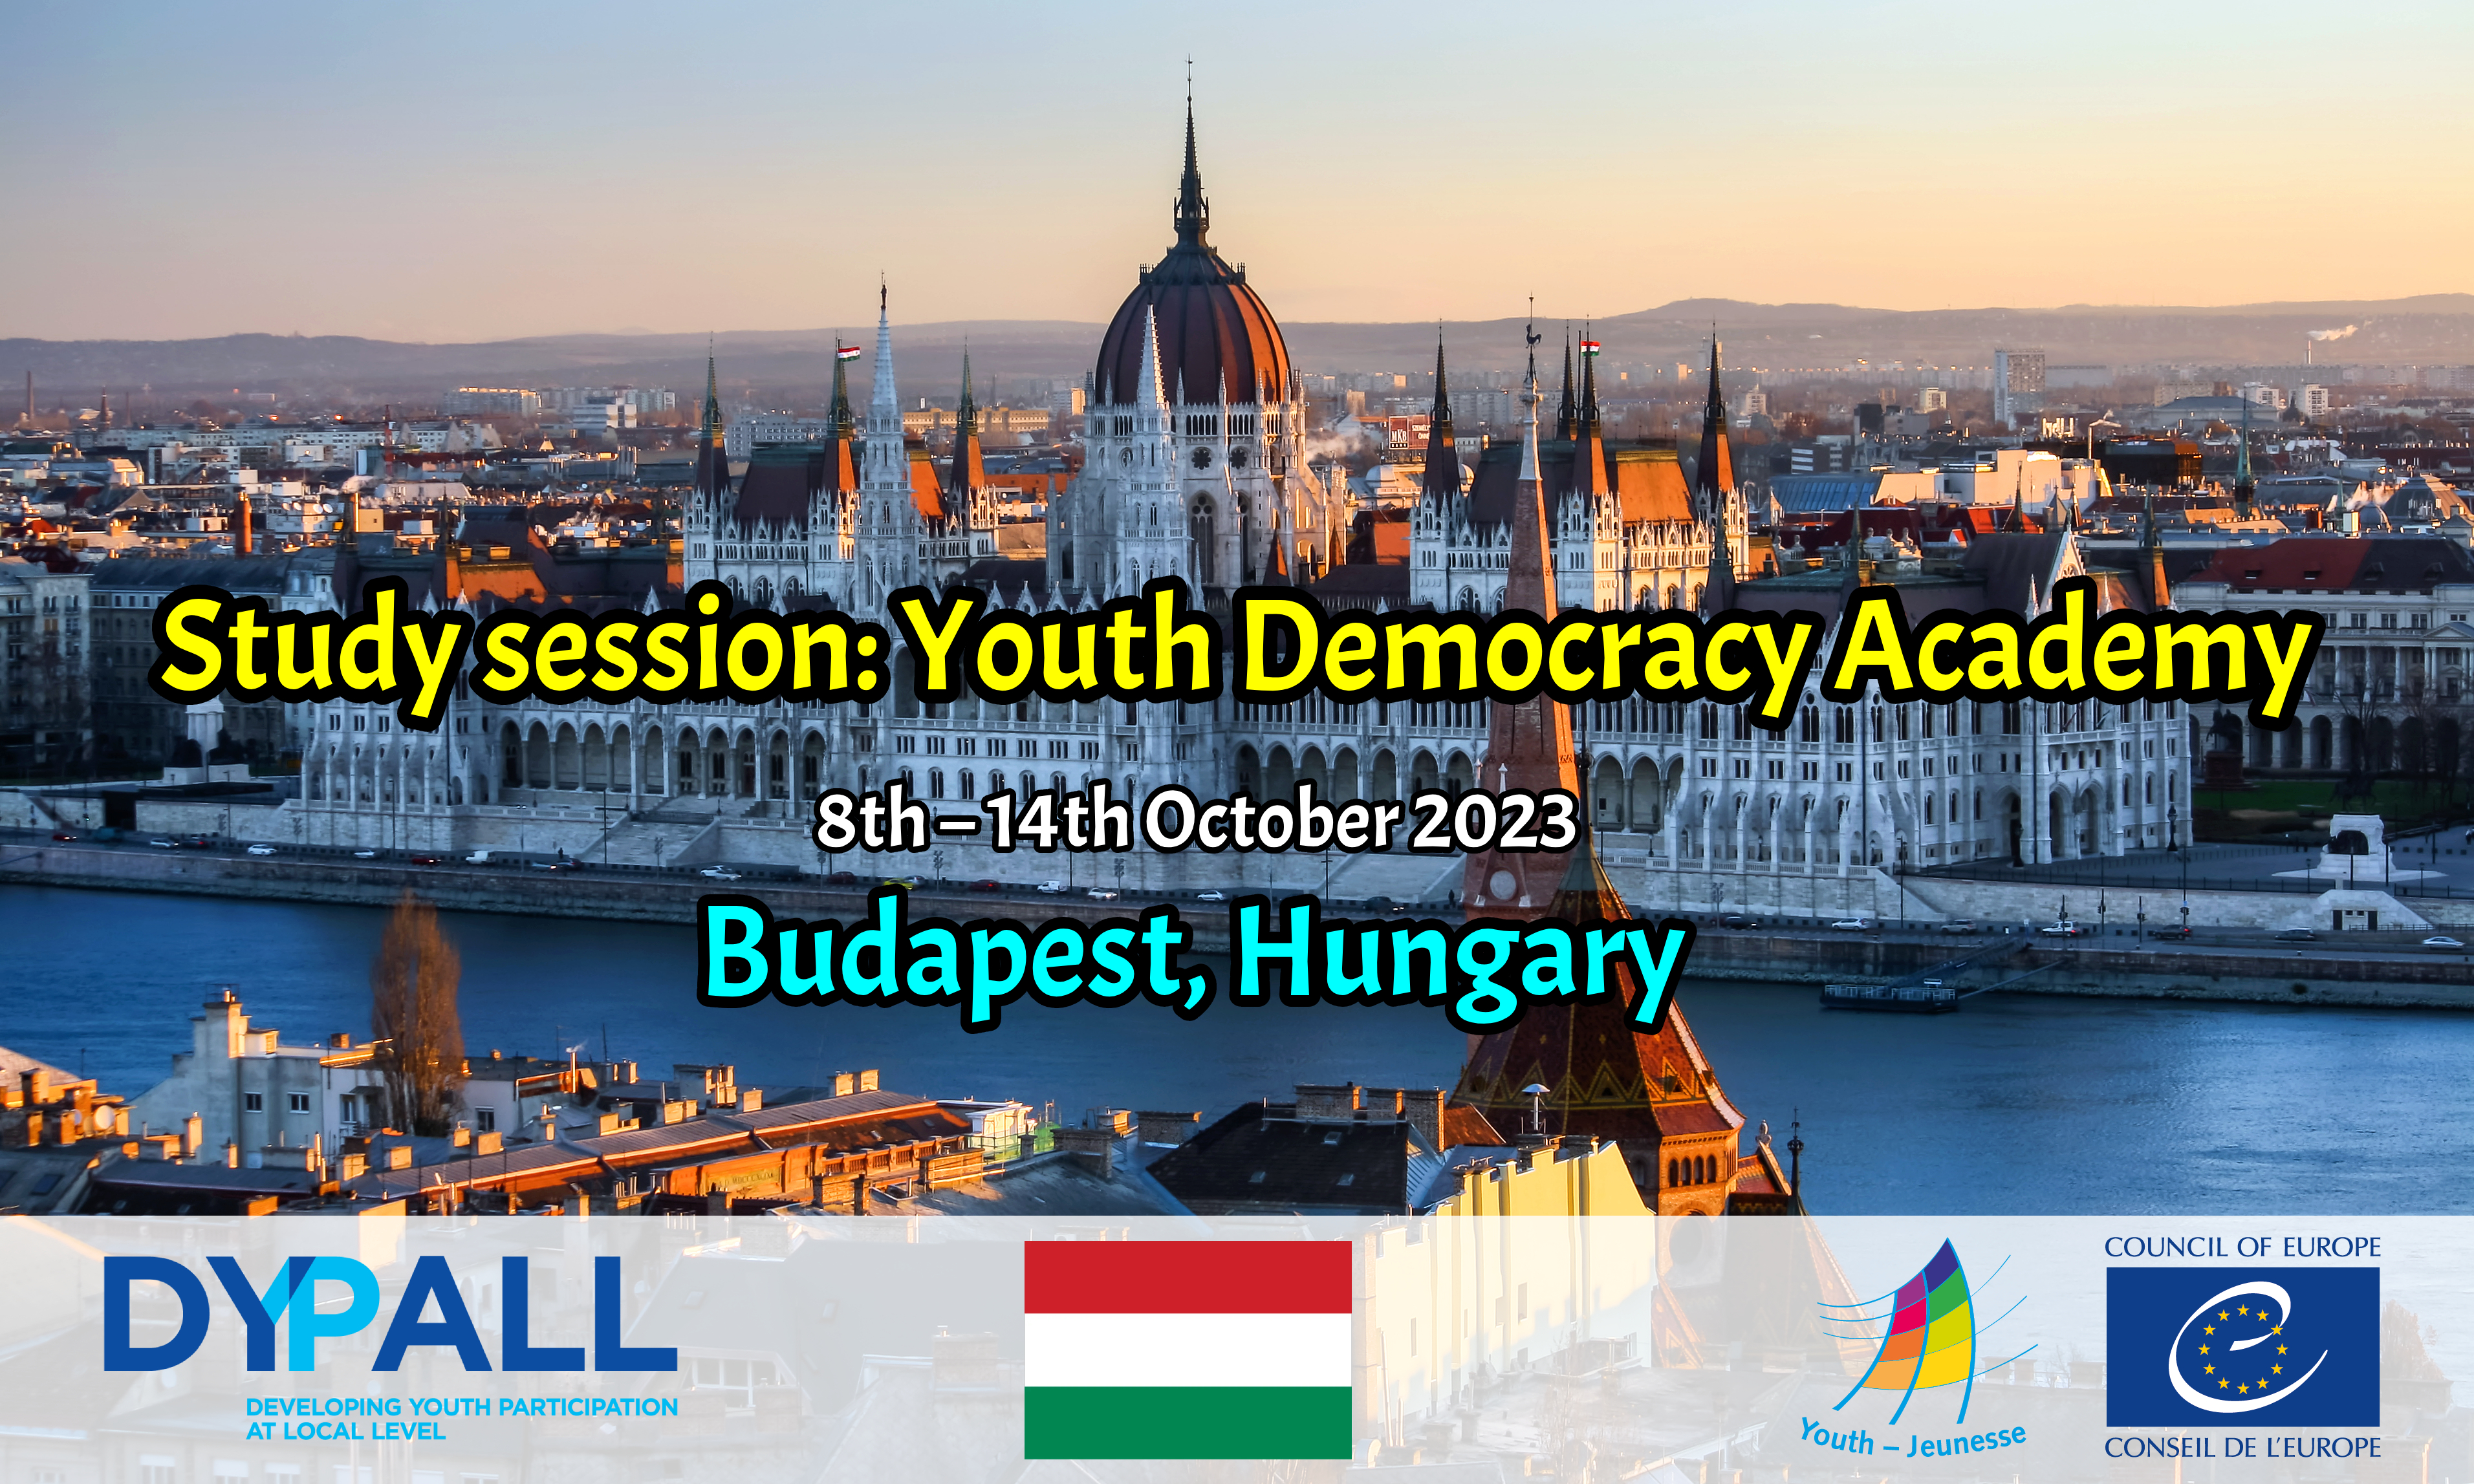 Study session: Youth Democracy Academy in Budapest, Hungary for one week